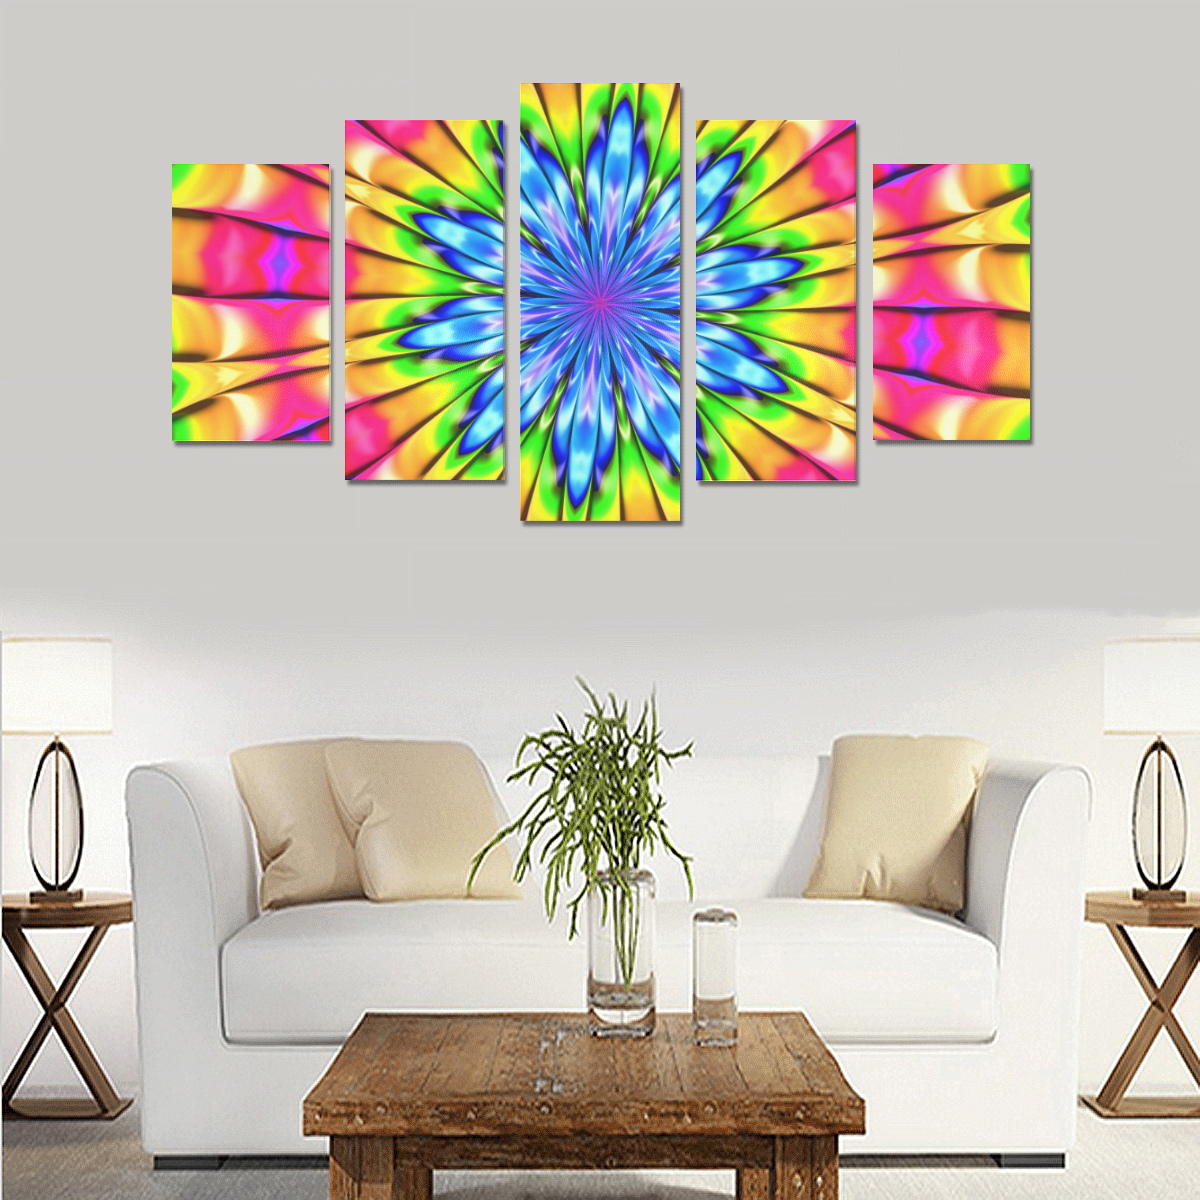 Spring Flowers Awakening Fractal Abstract Canvas Print Sets A (No Frame)